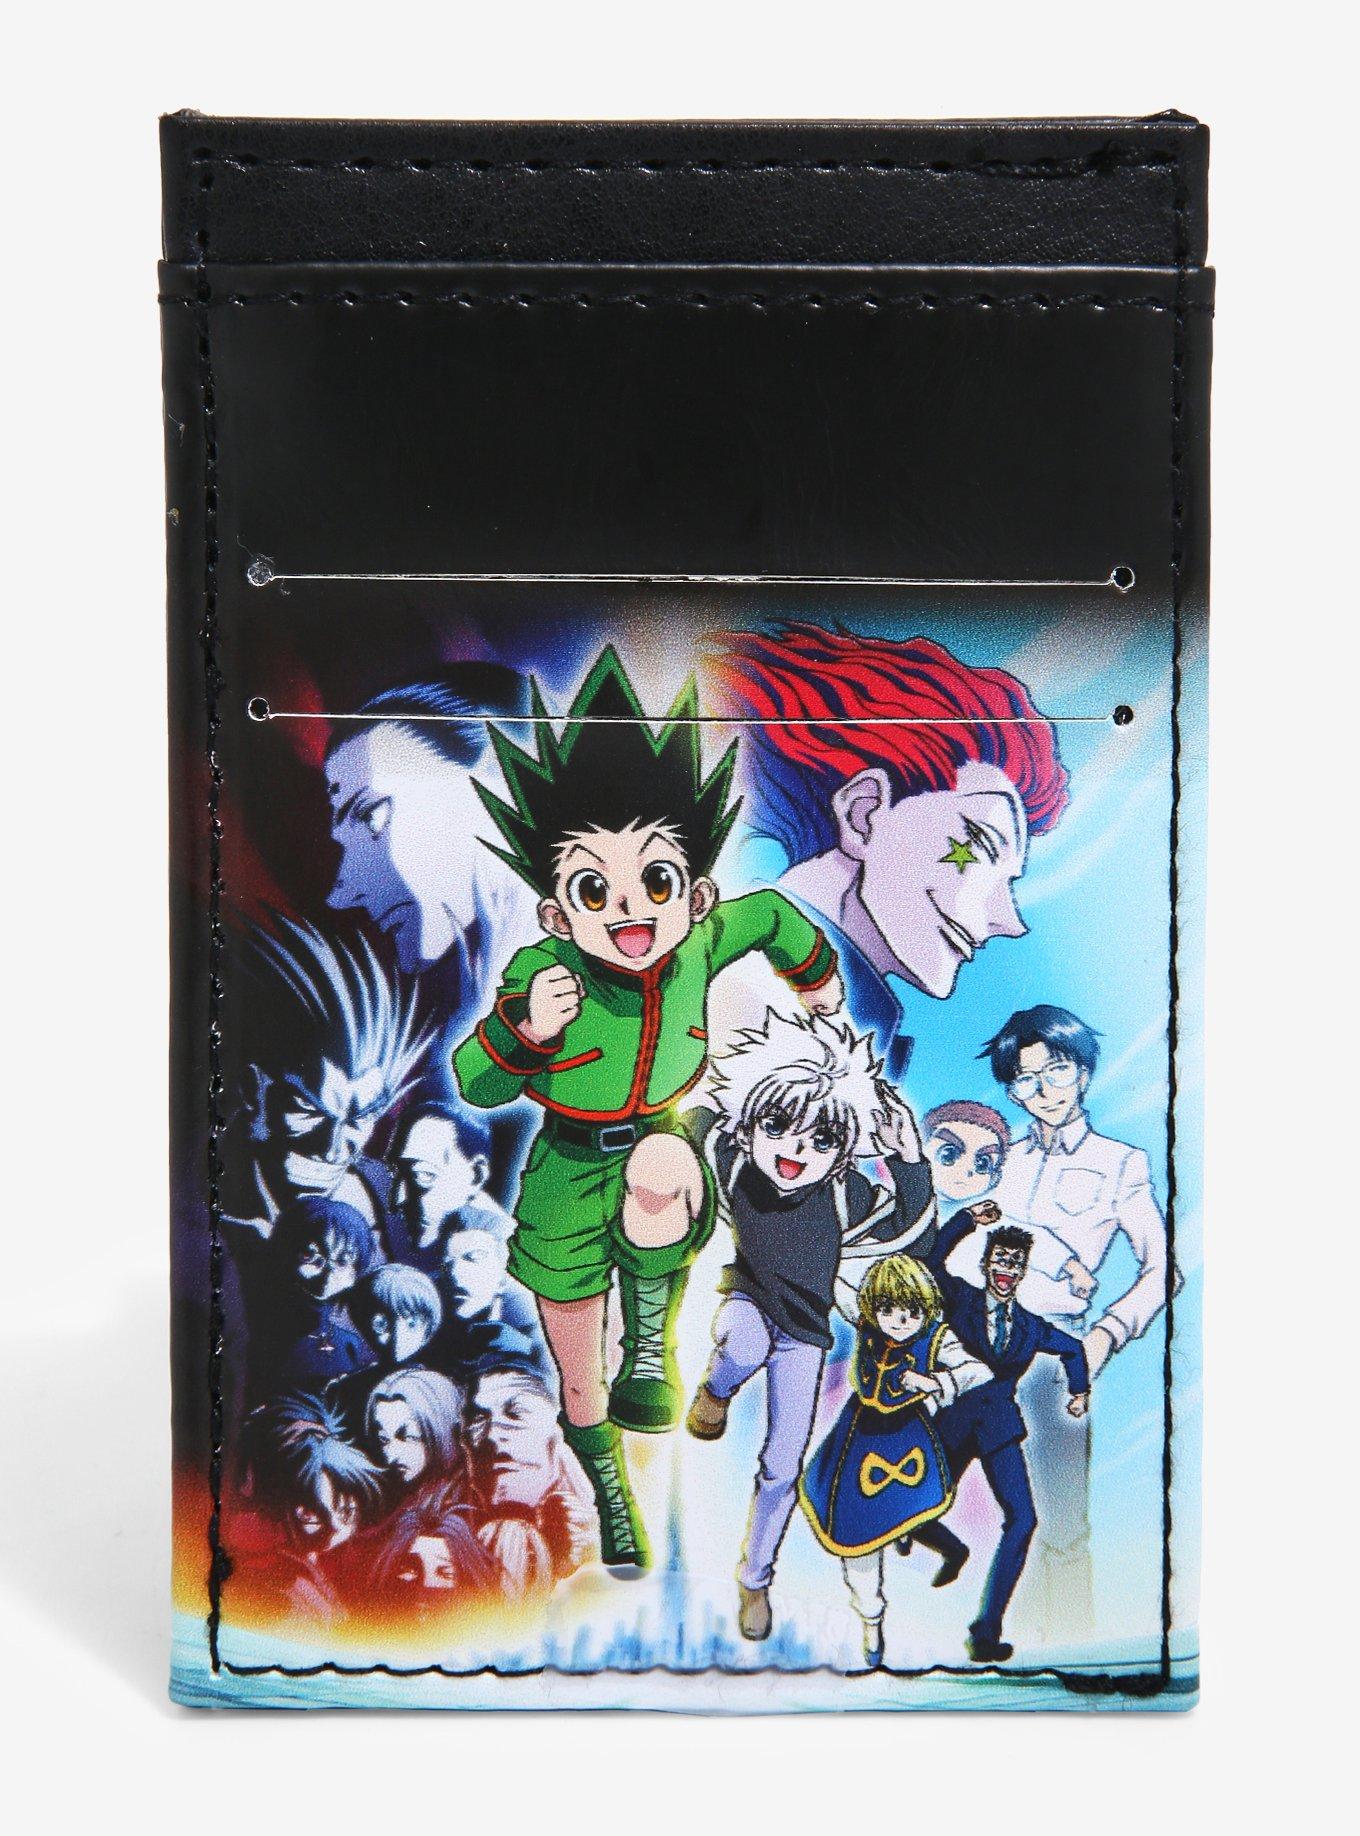 Hunter x Hunter Character Poster Cardholder - BoxLunch Exclusive, , hi-res